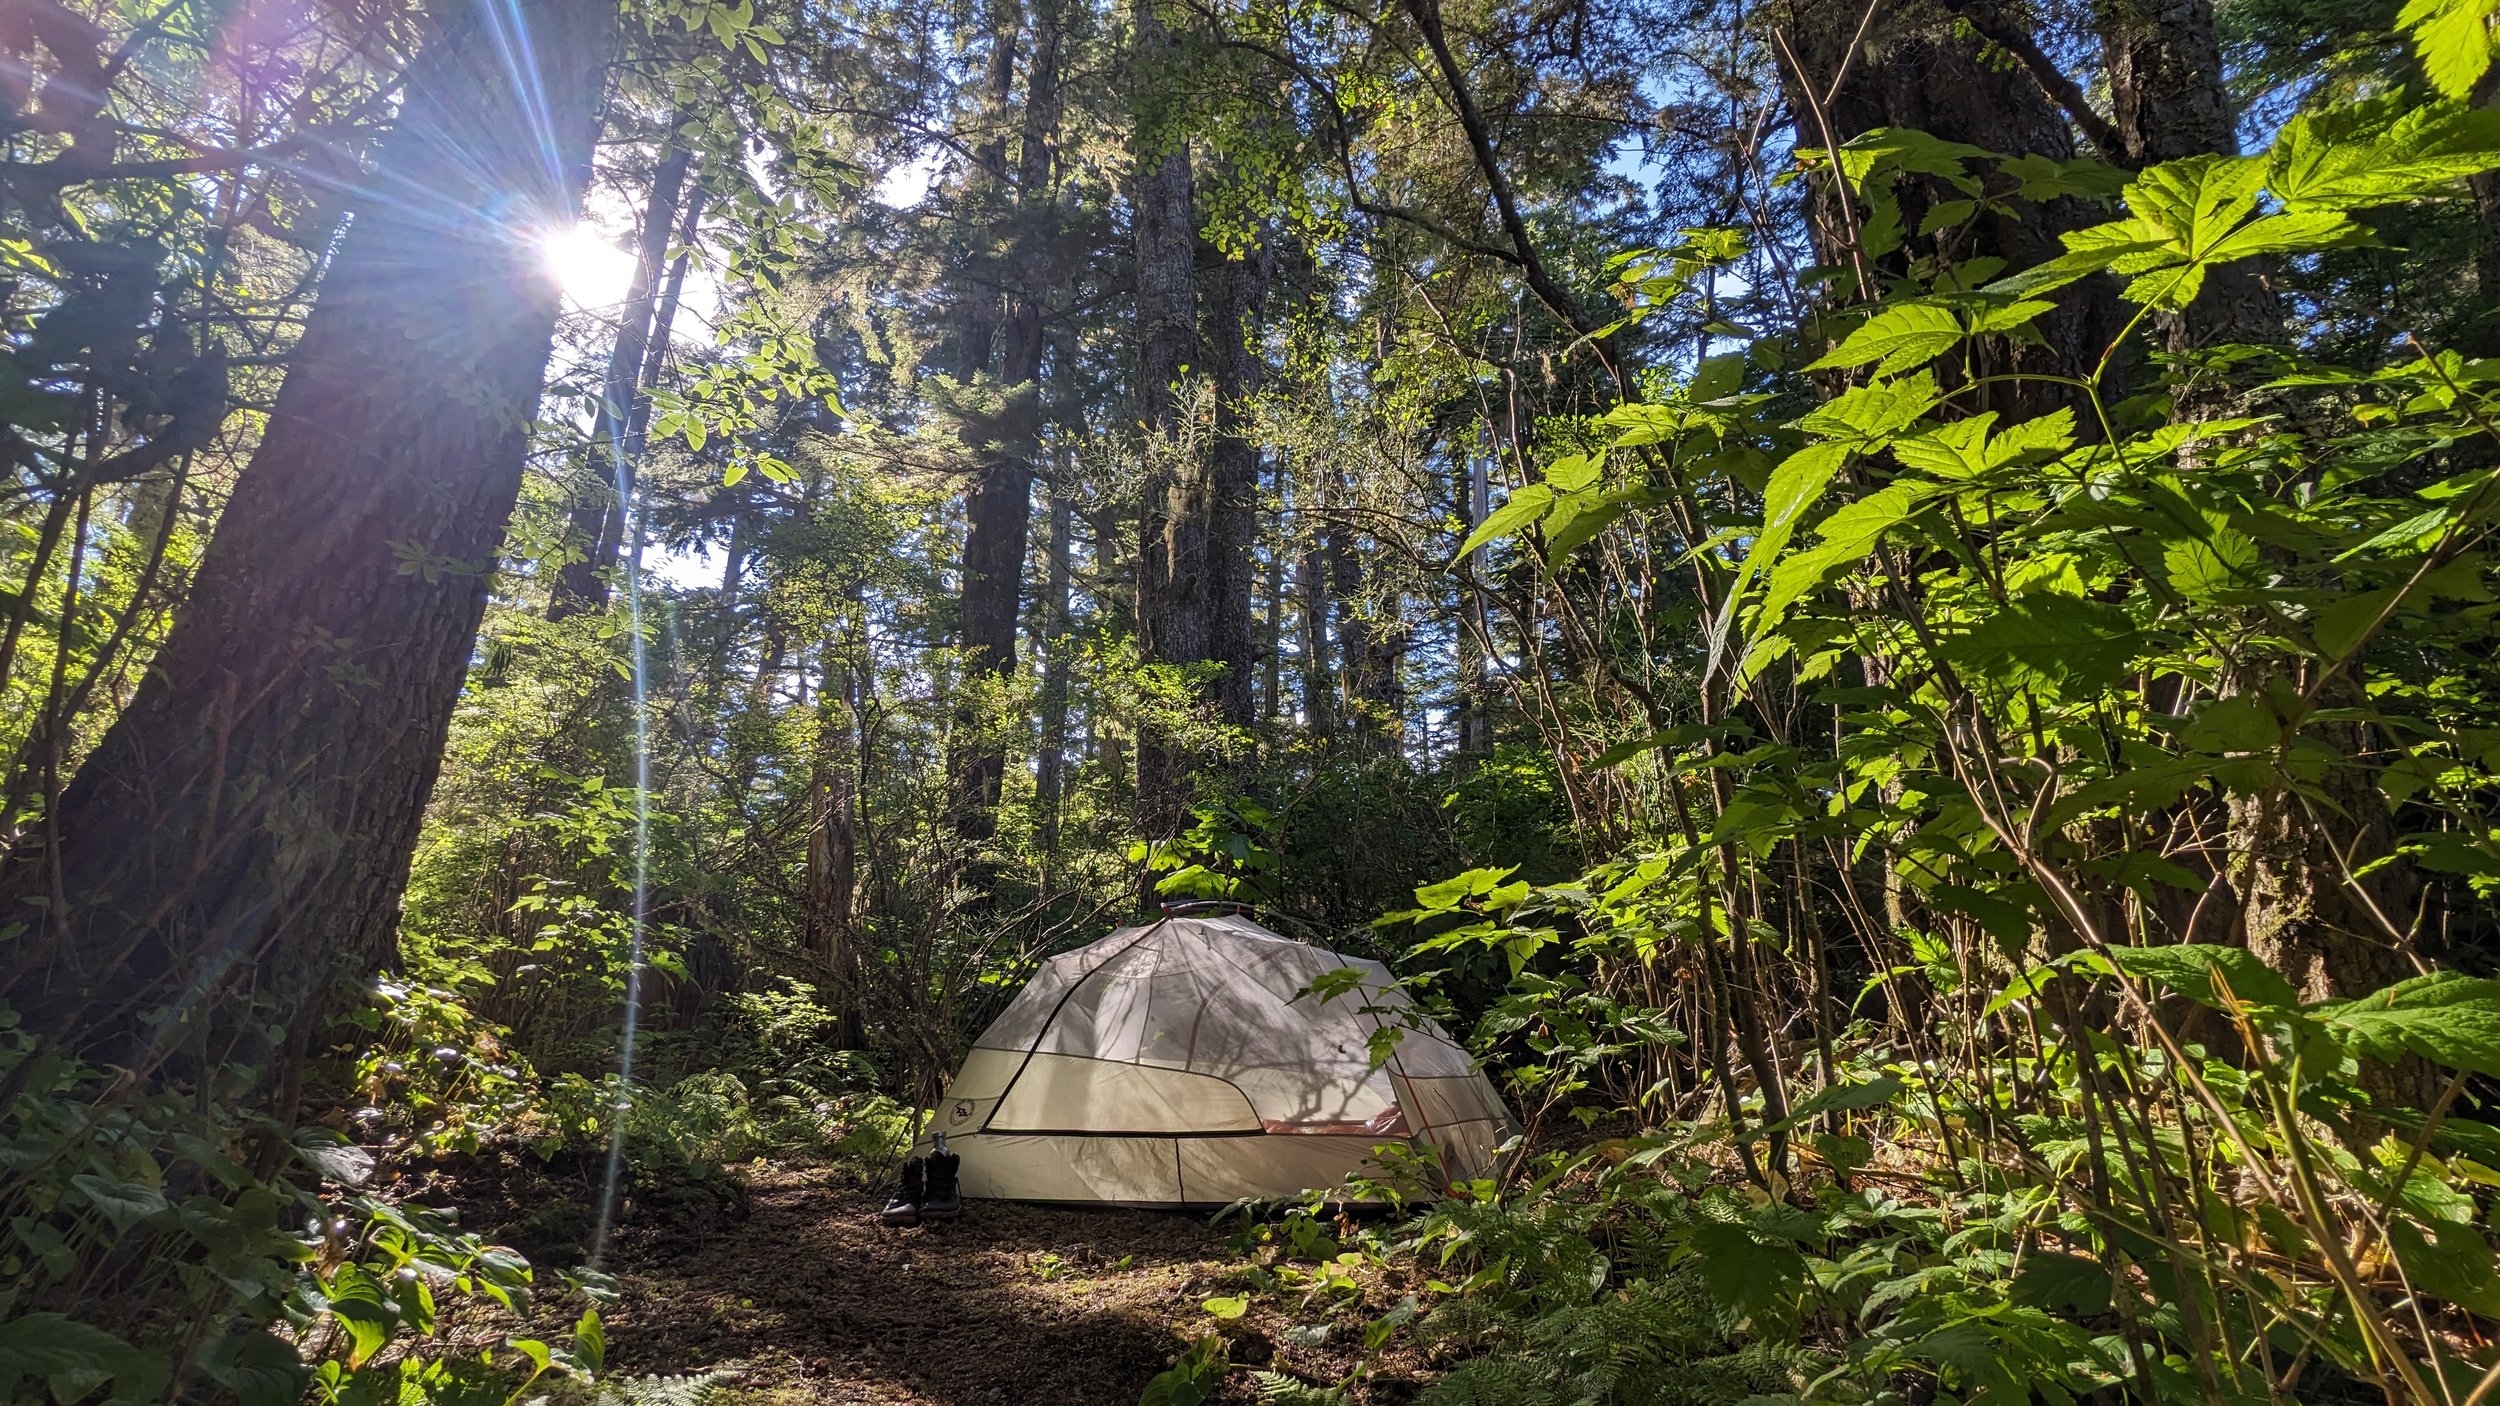  Camping among the old growth on North McMullin island. 